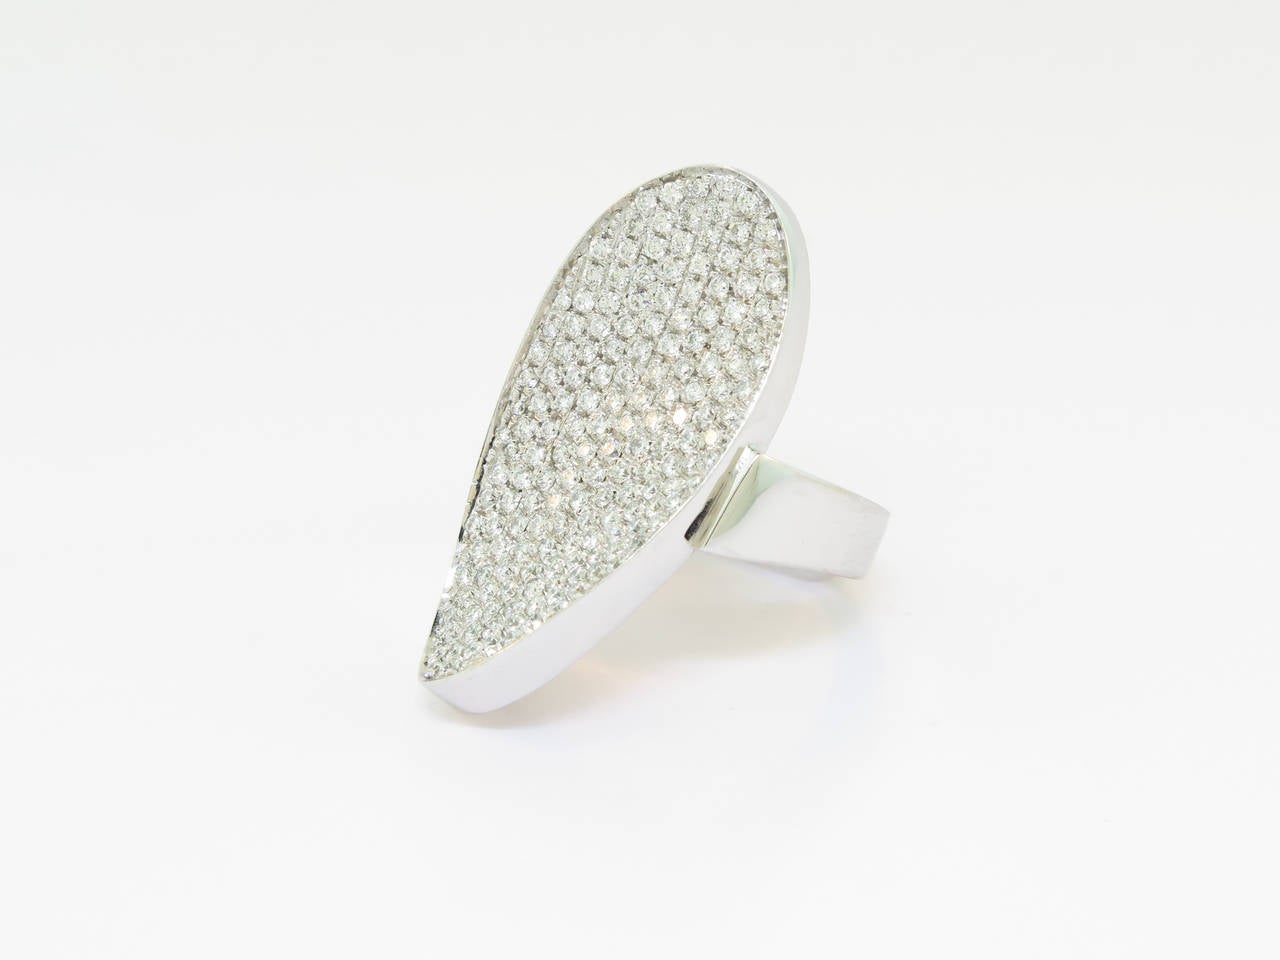 Fashion forward pave diamond feather ring crafted in 18 karat white gold.  This ring features 1.43 carats of pave set diamonds made in Italy by Mattioli.